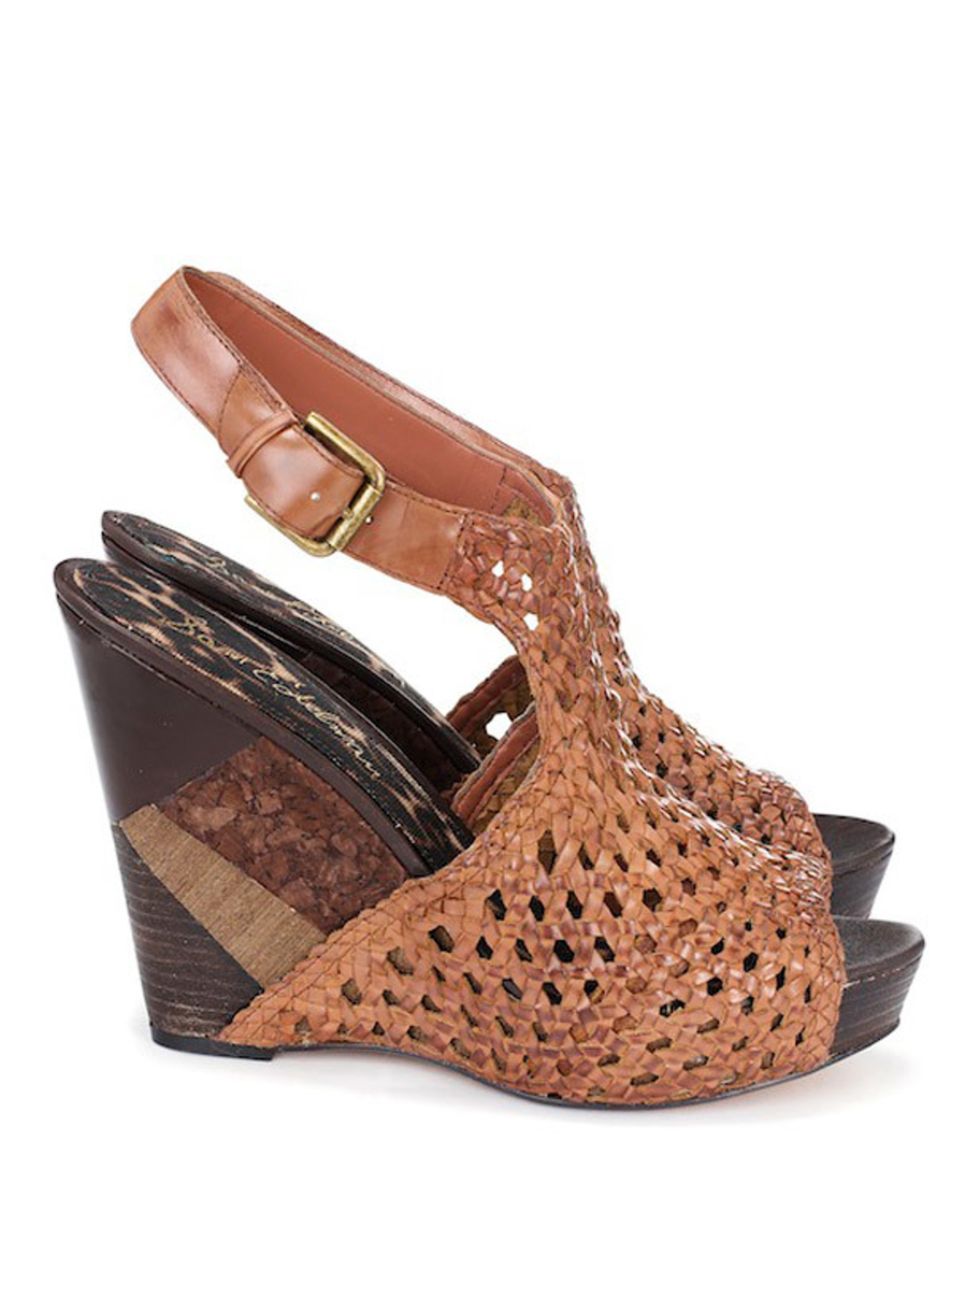 <p>Woven leather wedges, £140, by Sam Edelman at <a href="http://www.whistles.co.uk/fcp/categorylist/dept/sam_edelman">Whistles</a> </p>